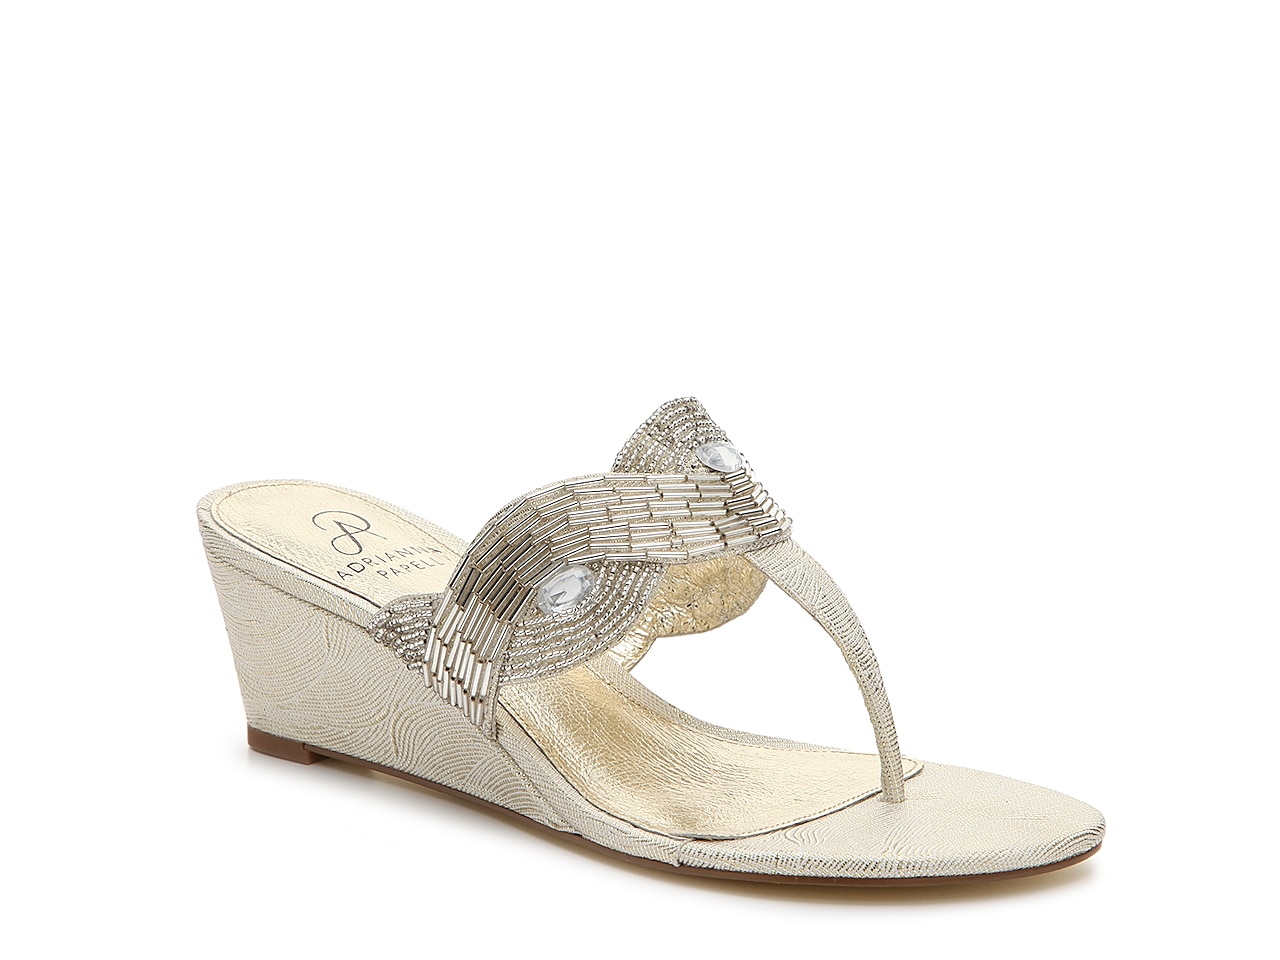 Adrianna Papell Diana Wedge Sandal Women's Shoes | DSW